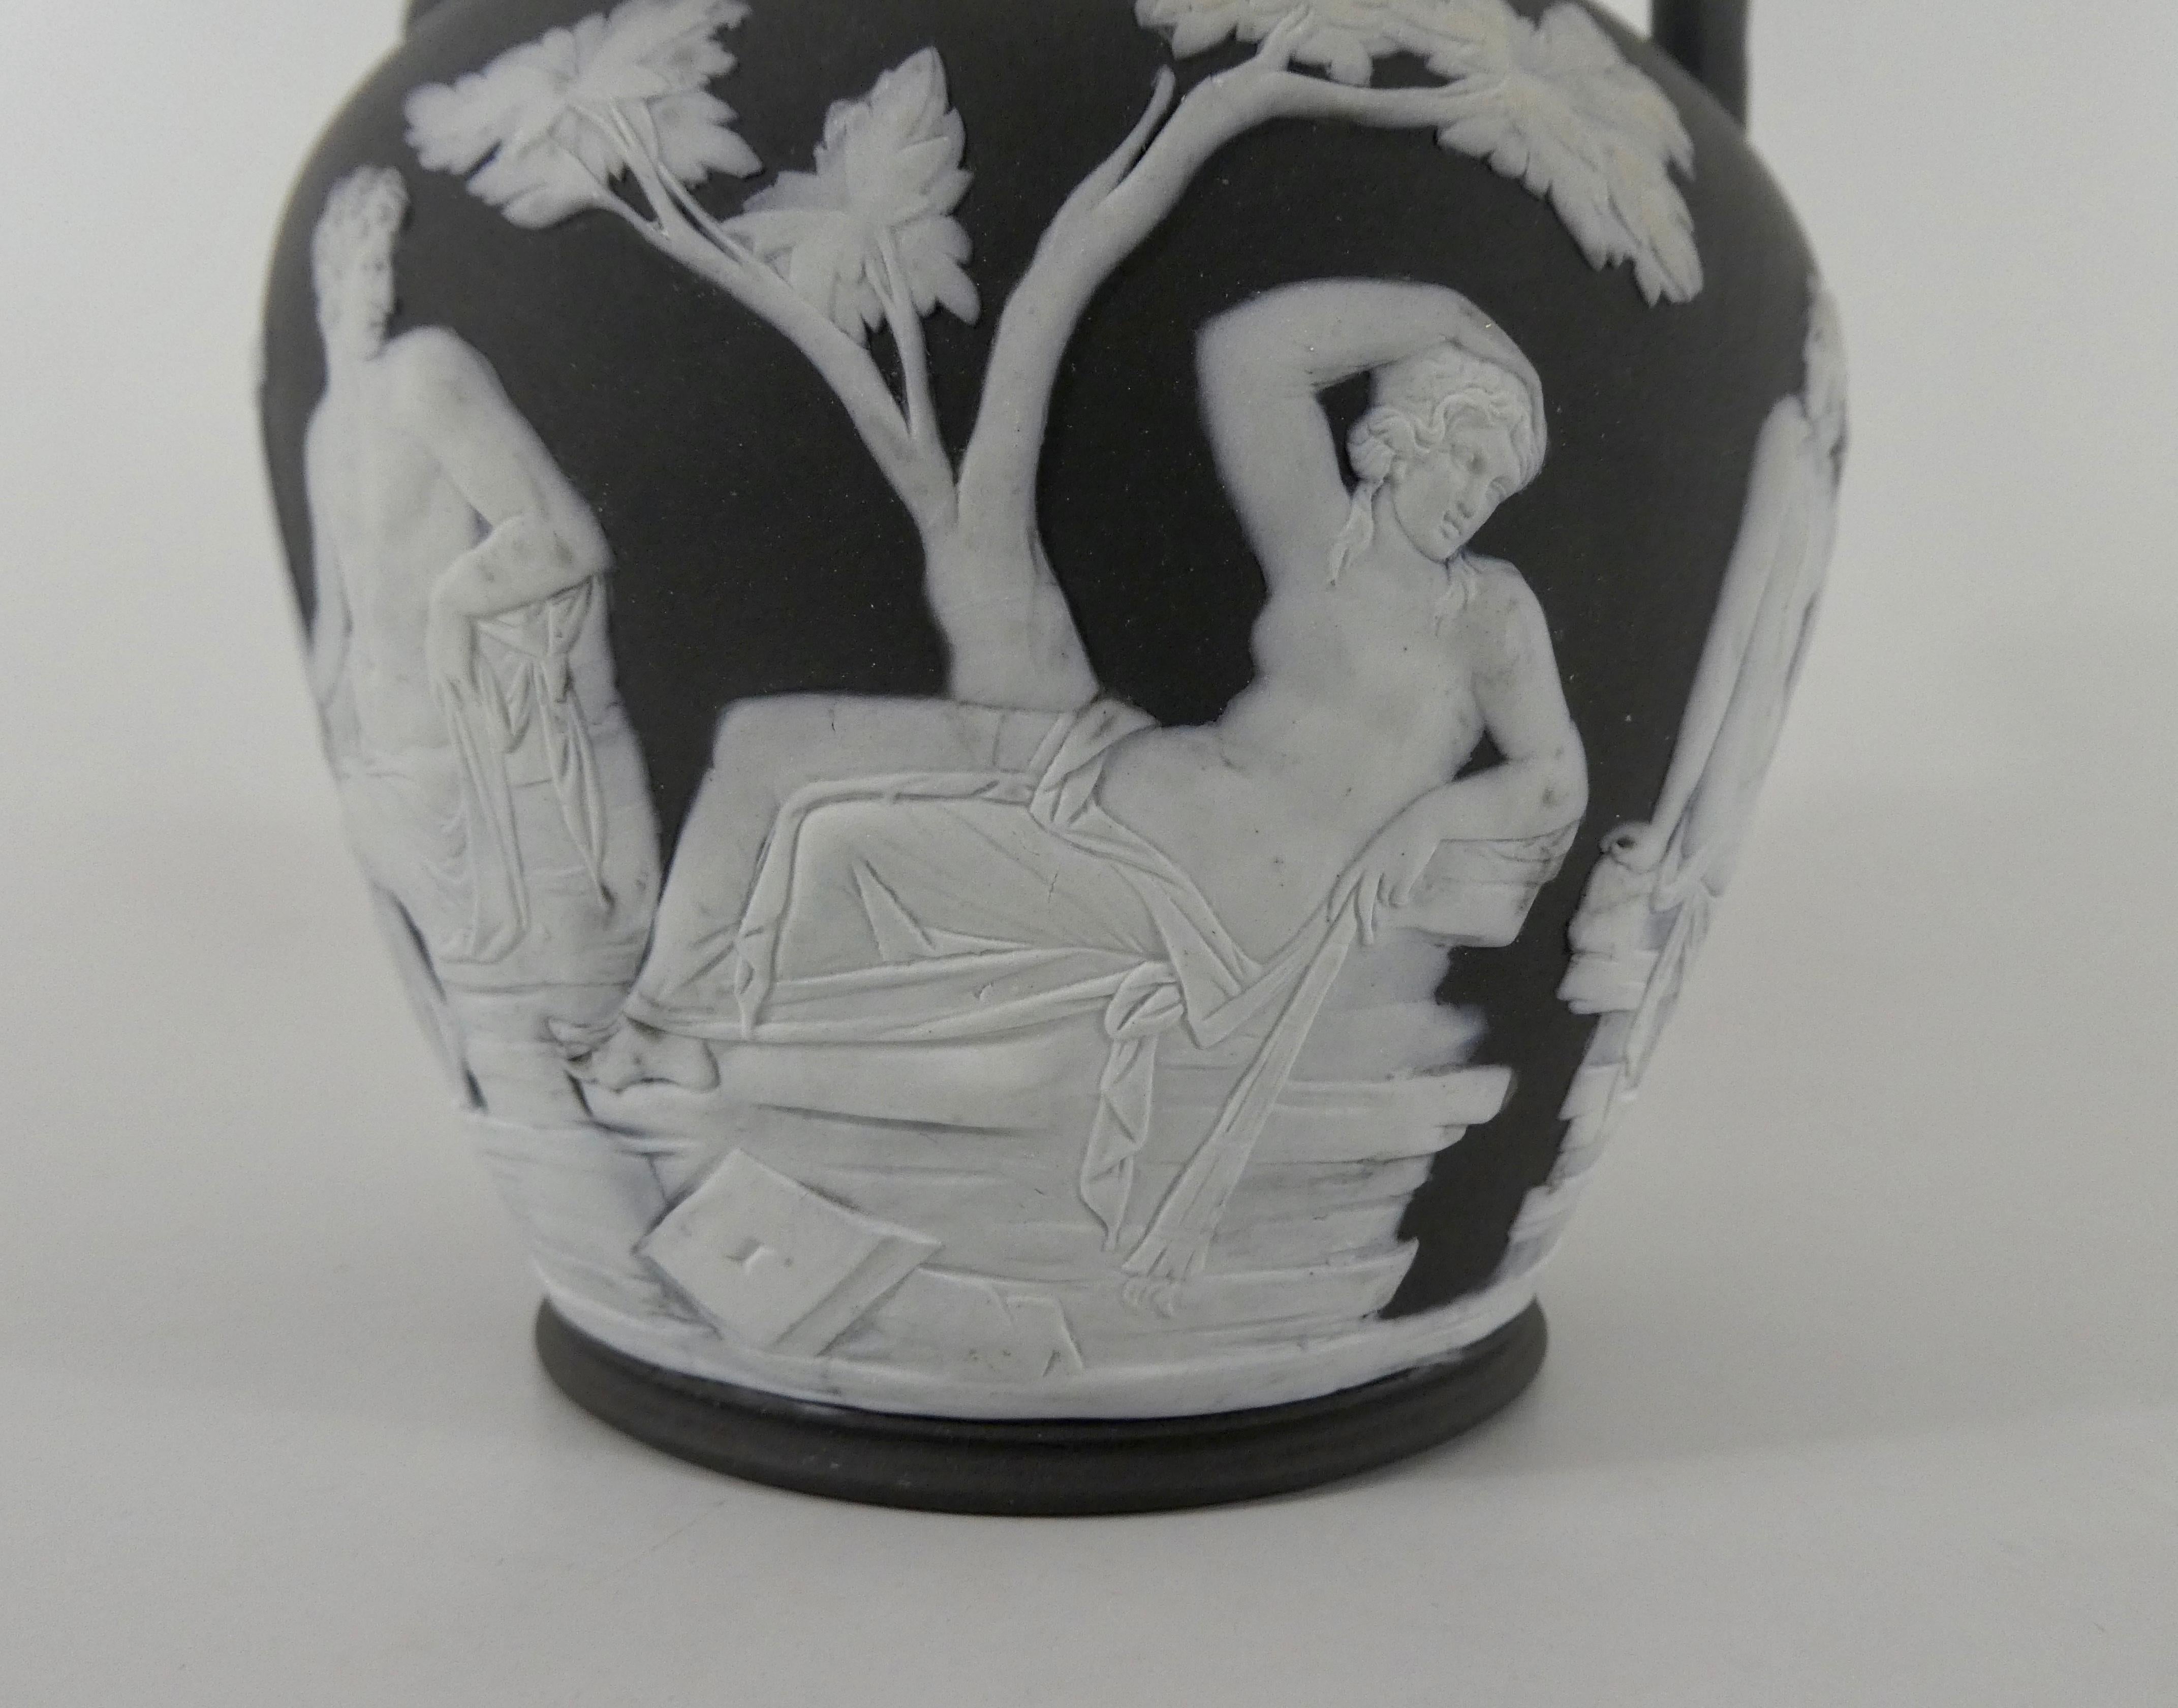 Wedgwood black basalt and white jasper relief vase, circa 1850. Modelled after the Portland Vase, the black solid jasper ground applied with white reliefs depicting the myth of Peleus and Thetis.
Impressed ‘Wedgwood’, to the base.
Height - 17 cm,